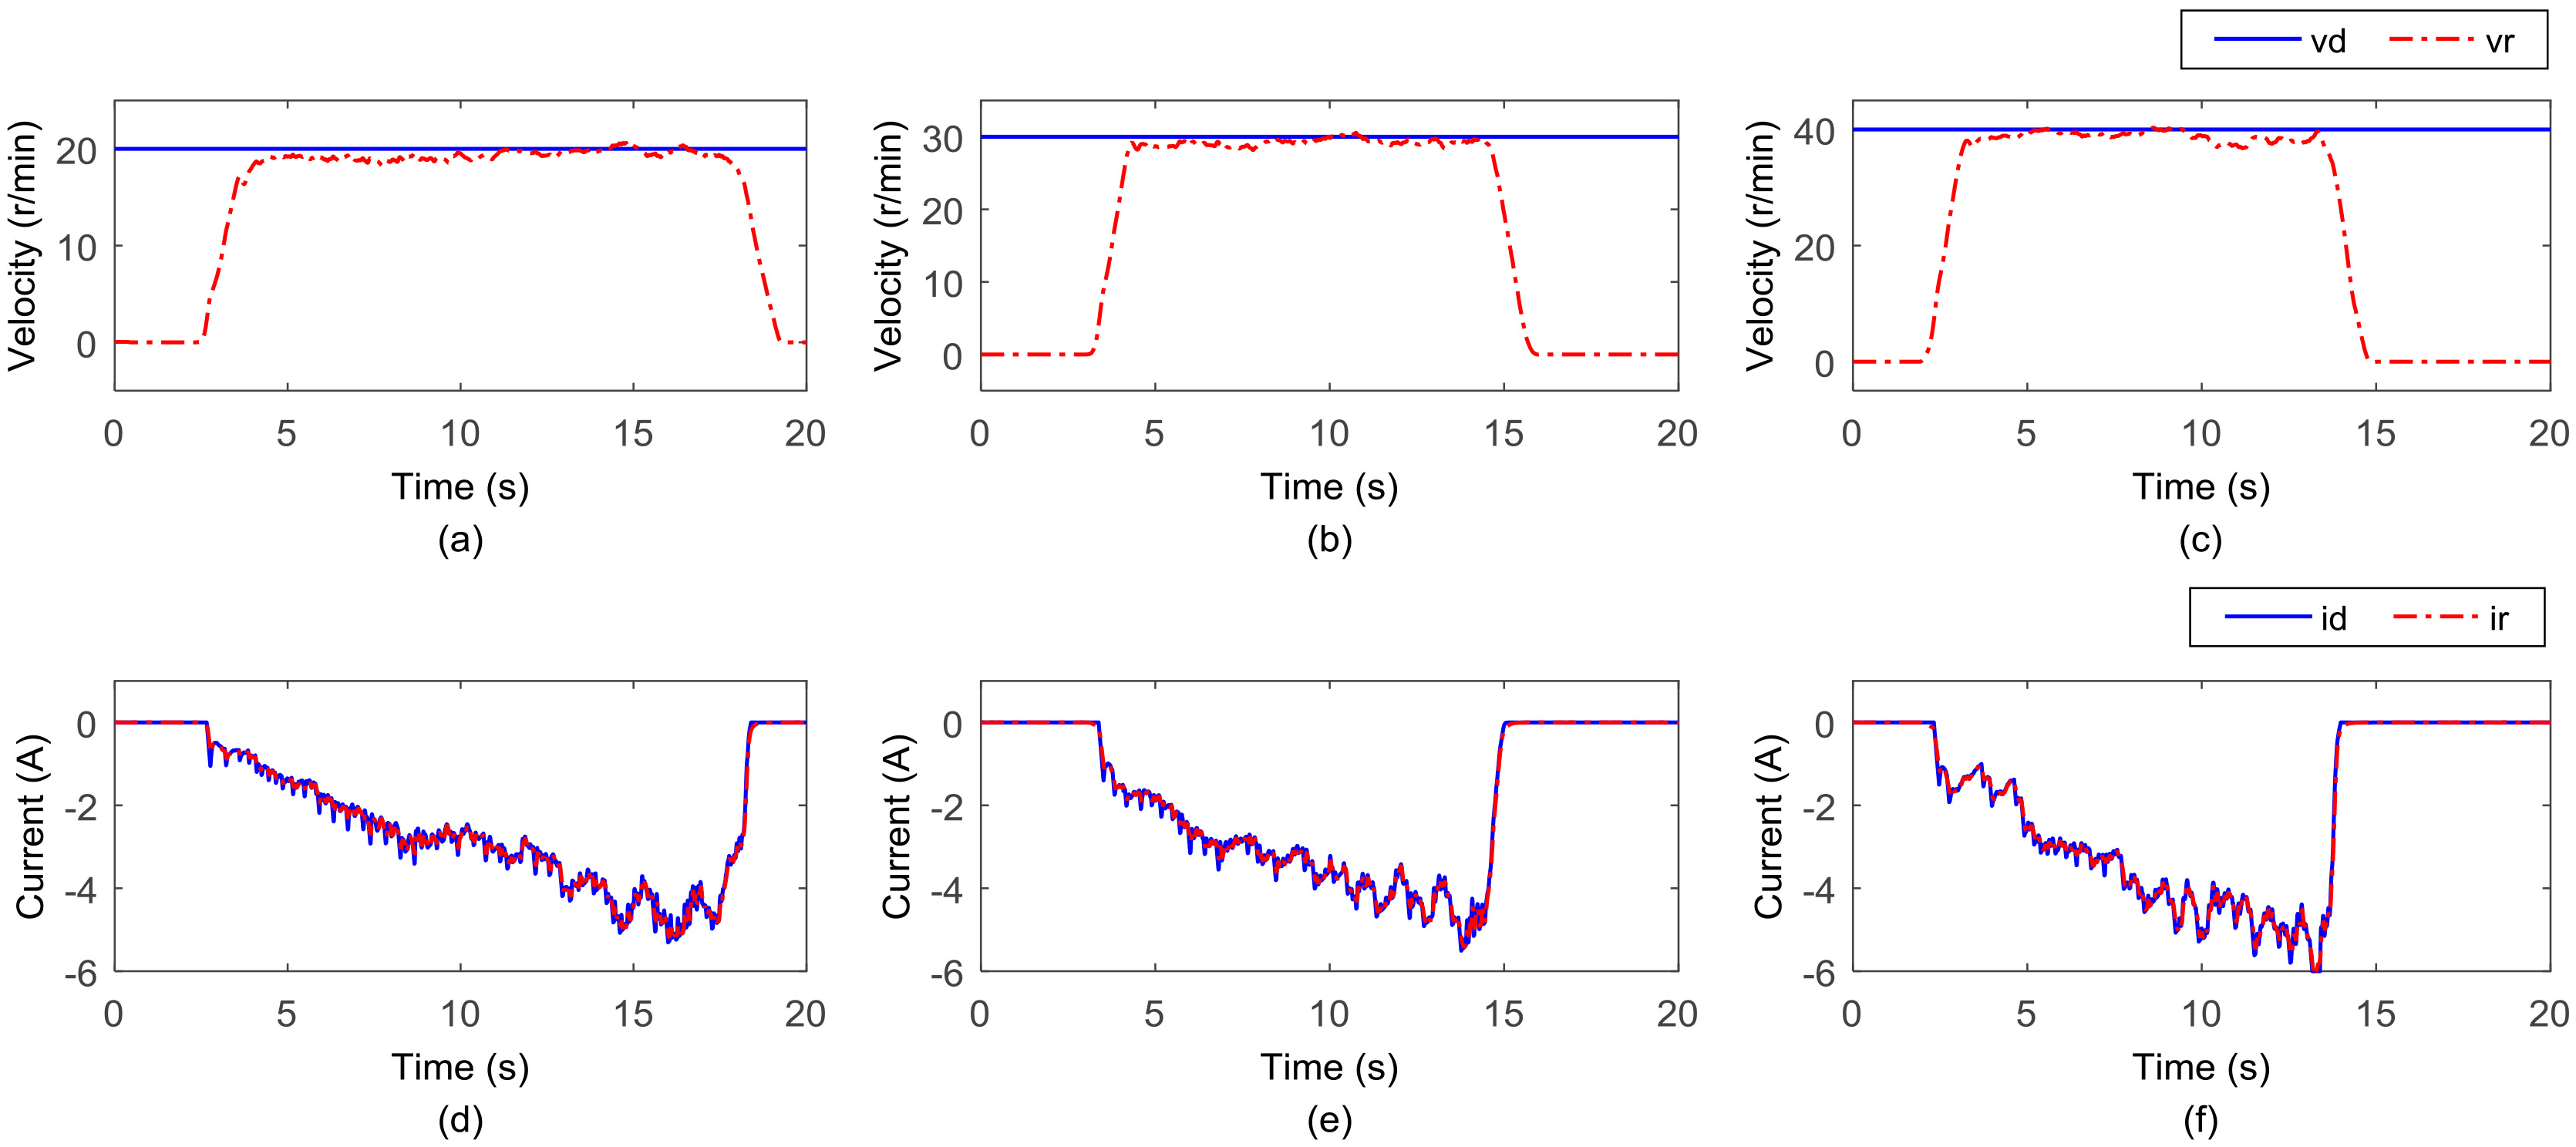 Results of the second part of isokinetic training experiment. (a) The speed that target speed is set to 20 r/min. (b) The speed that target speed is set to 30 r/min. (c) The speed that target speed is set to 40 r/min. (d) The current that target speed is set to 20 r/min. (e) The current that target speed is set to 30 r/min. (f) The current that target speed is set to 40 r/min.